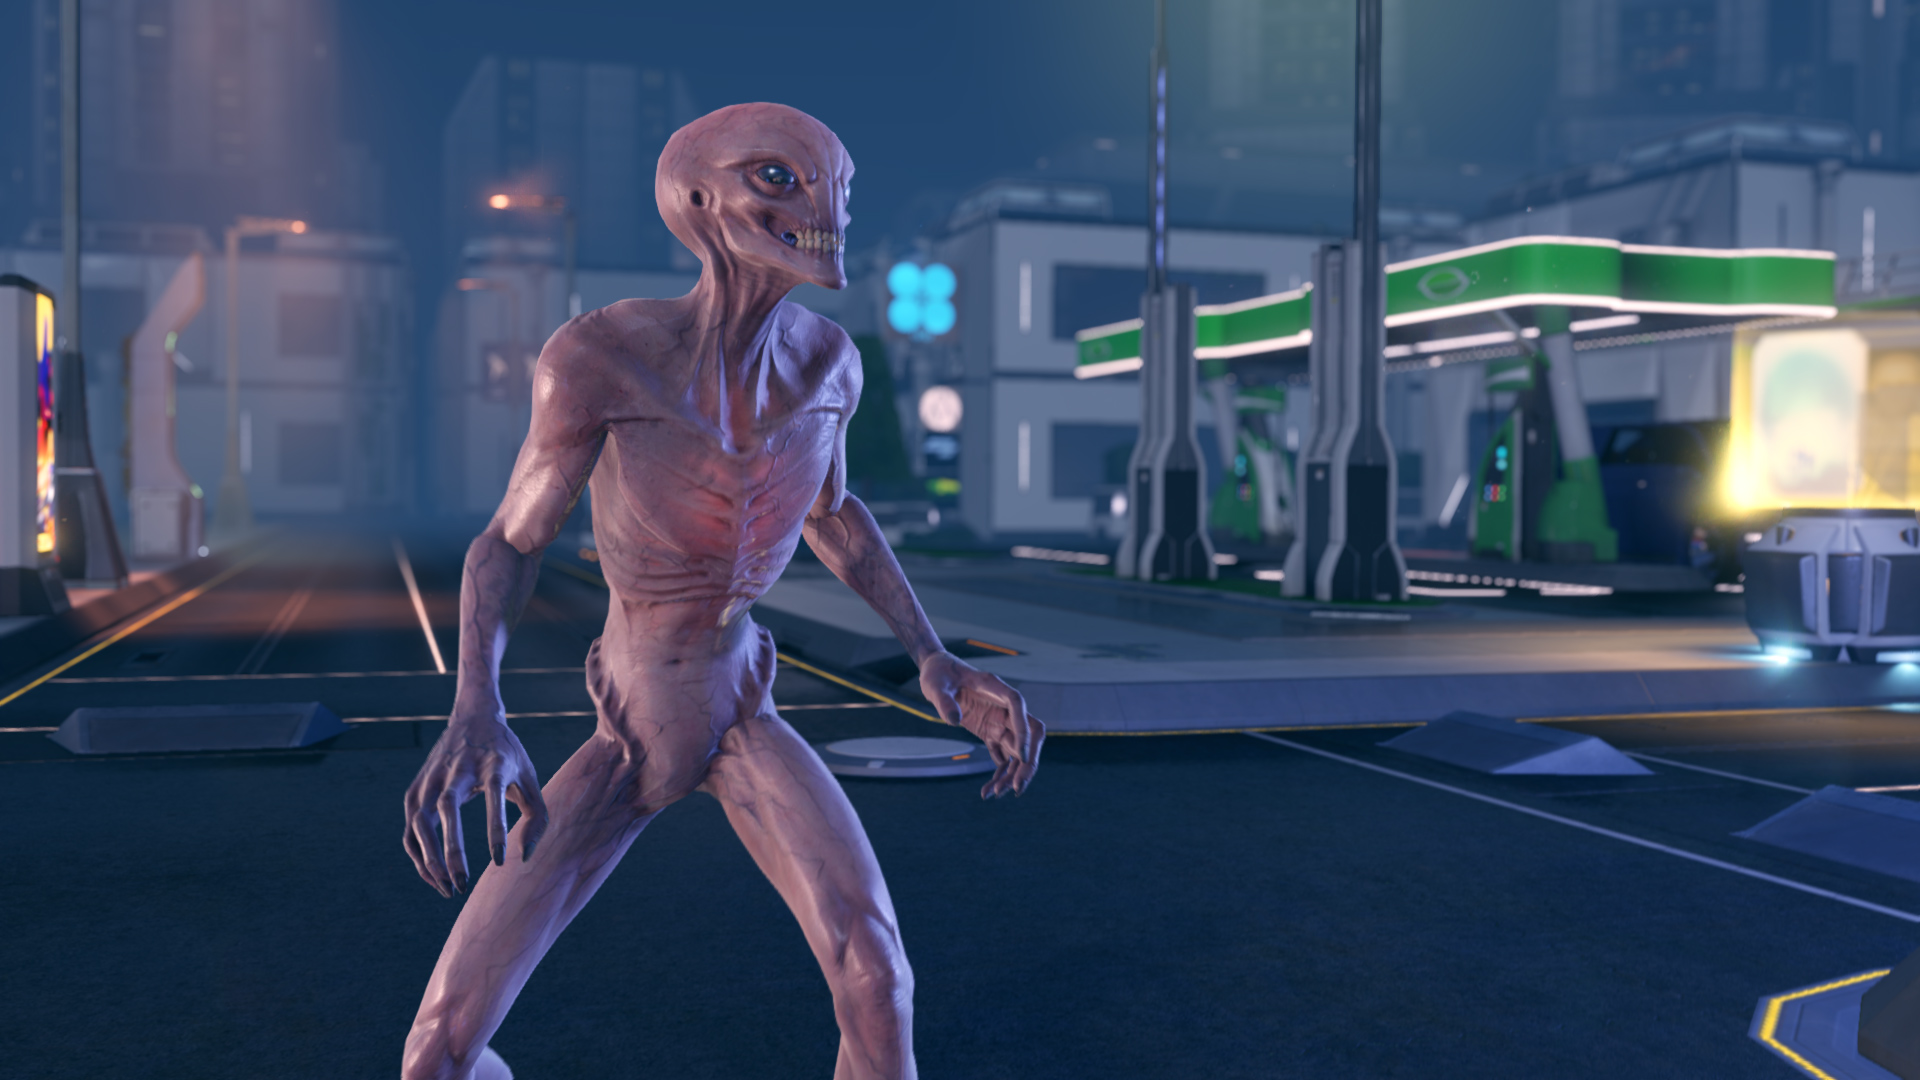 “XCOM 2” Announced - It Will Be PC-Only (For Now)